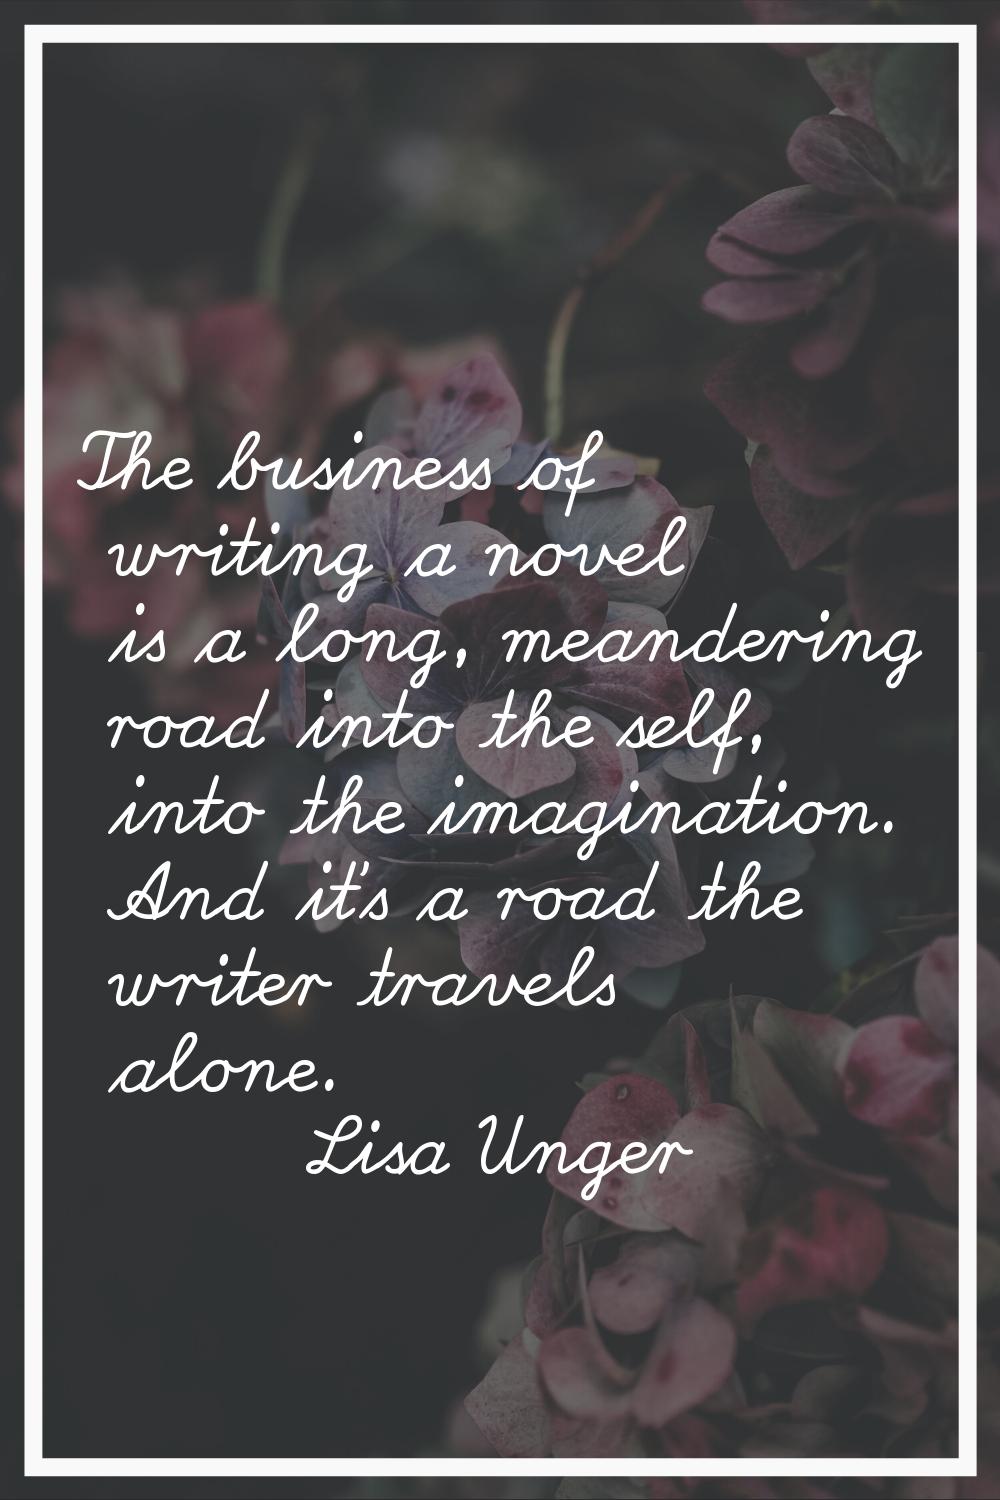 The business of writing a novel is a long, meandering road into the self, into the imagination. And